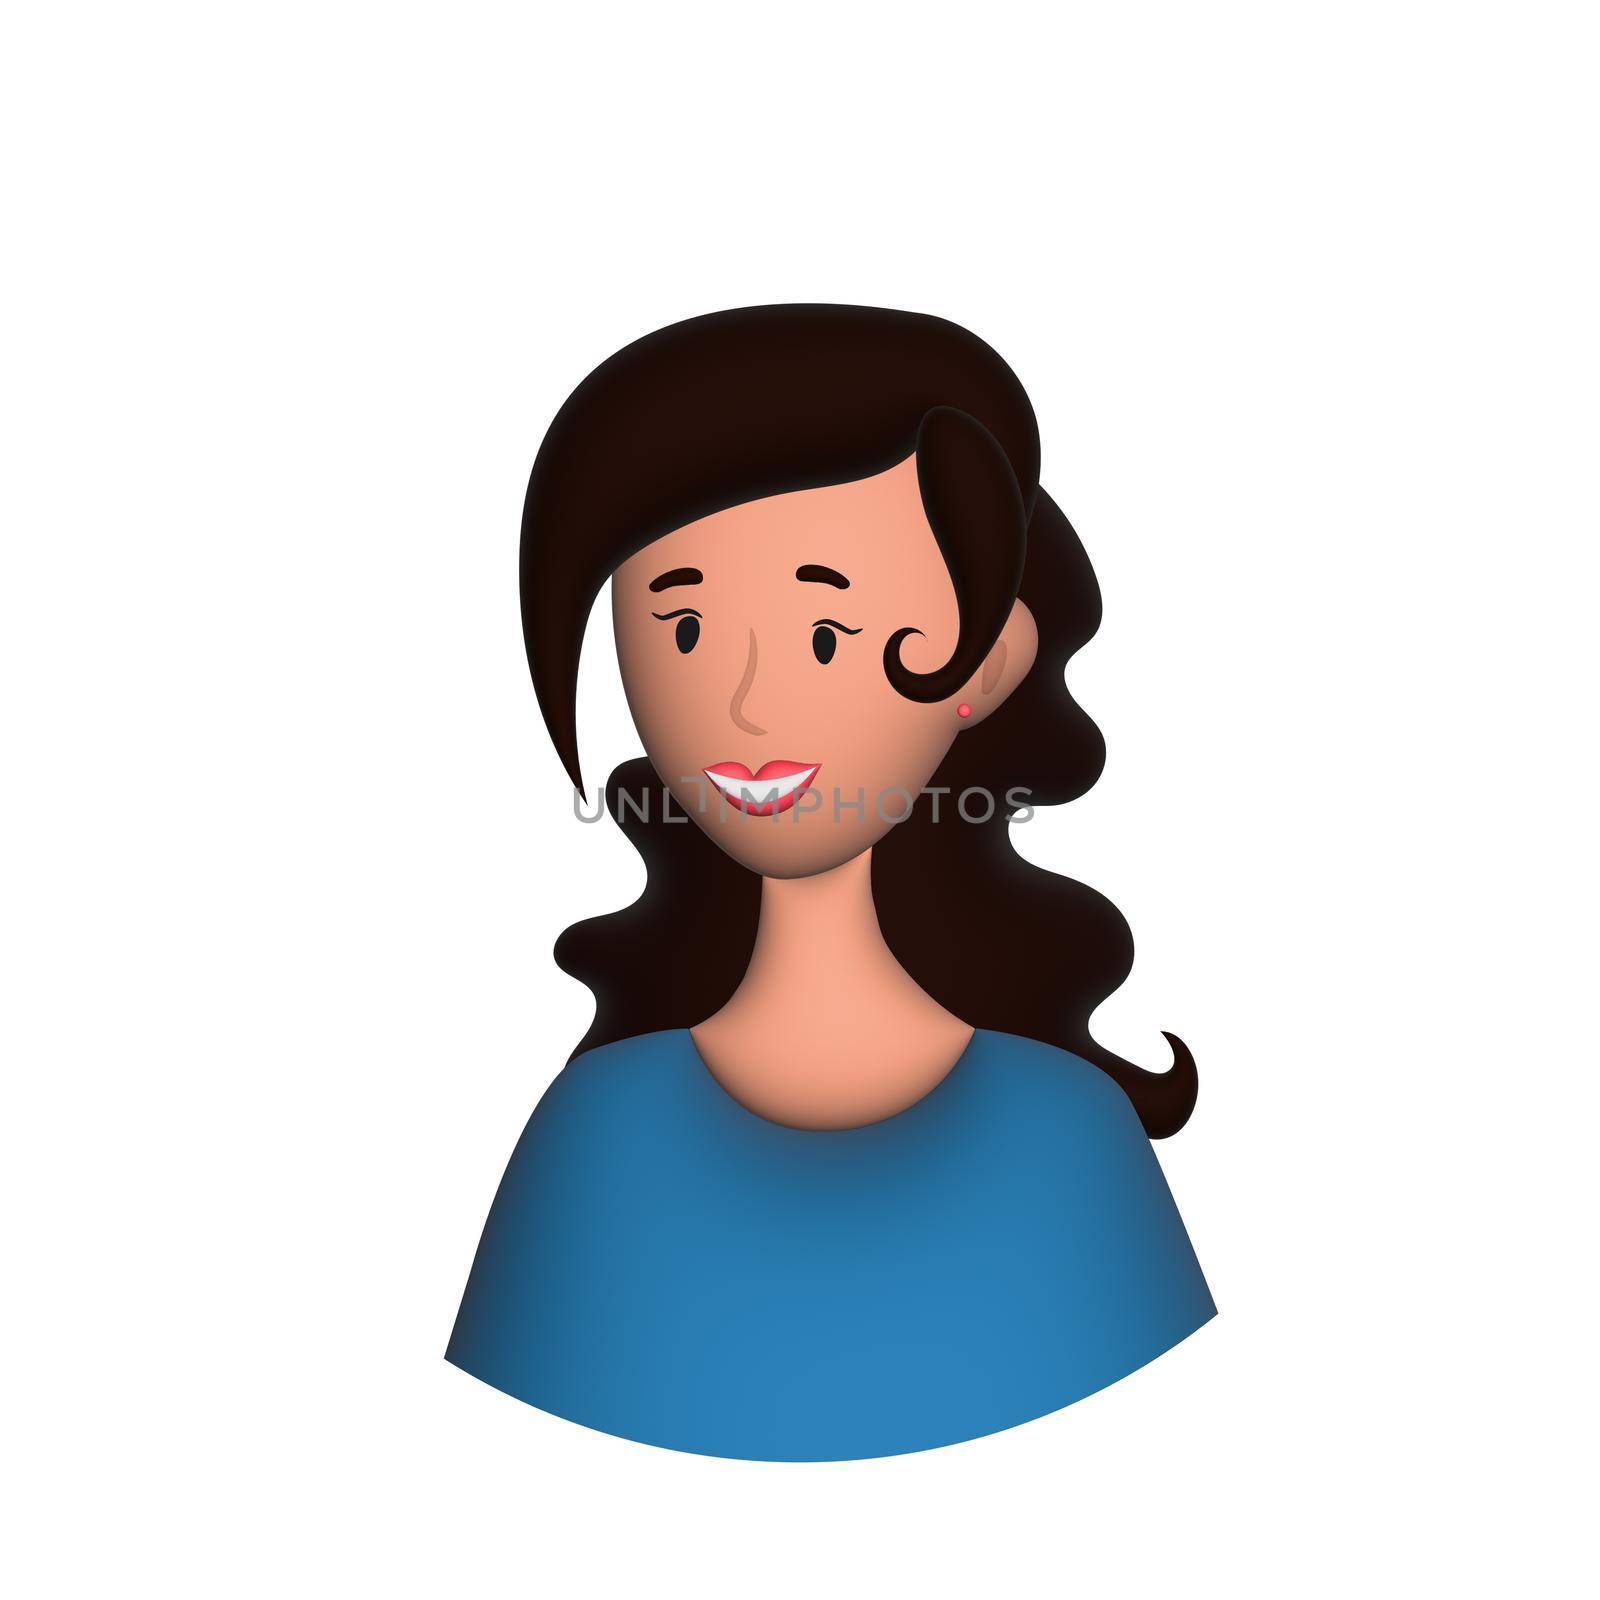 Web icon man, girl with long hair - illustration